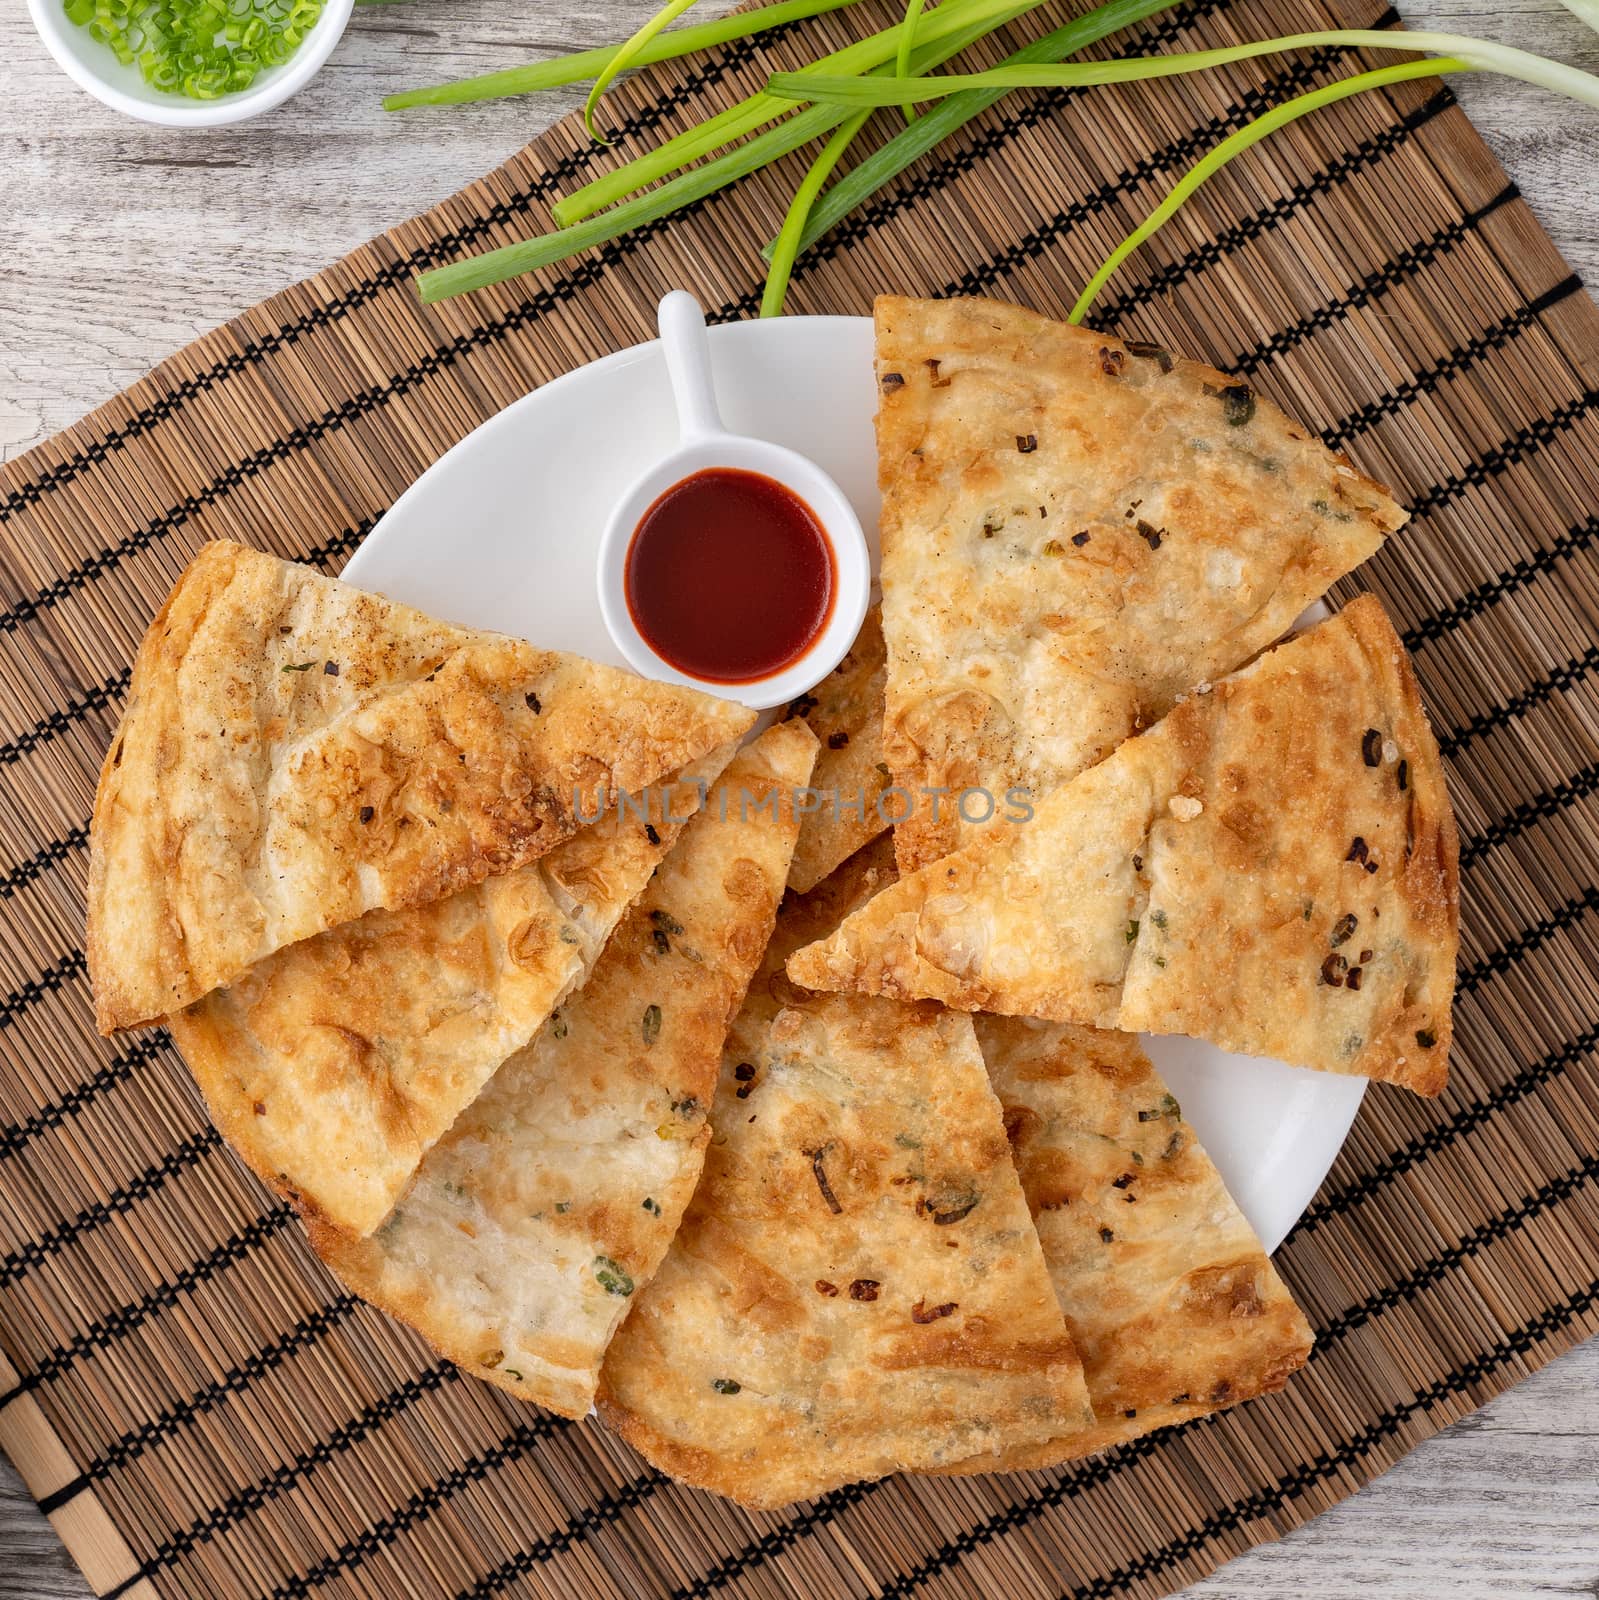 Taiwanese food - delicious flaky scallion pie pancakes on bright wooden table background, traditional snack in Taiwan, top view.